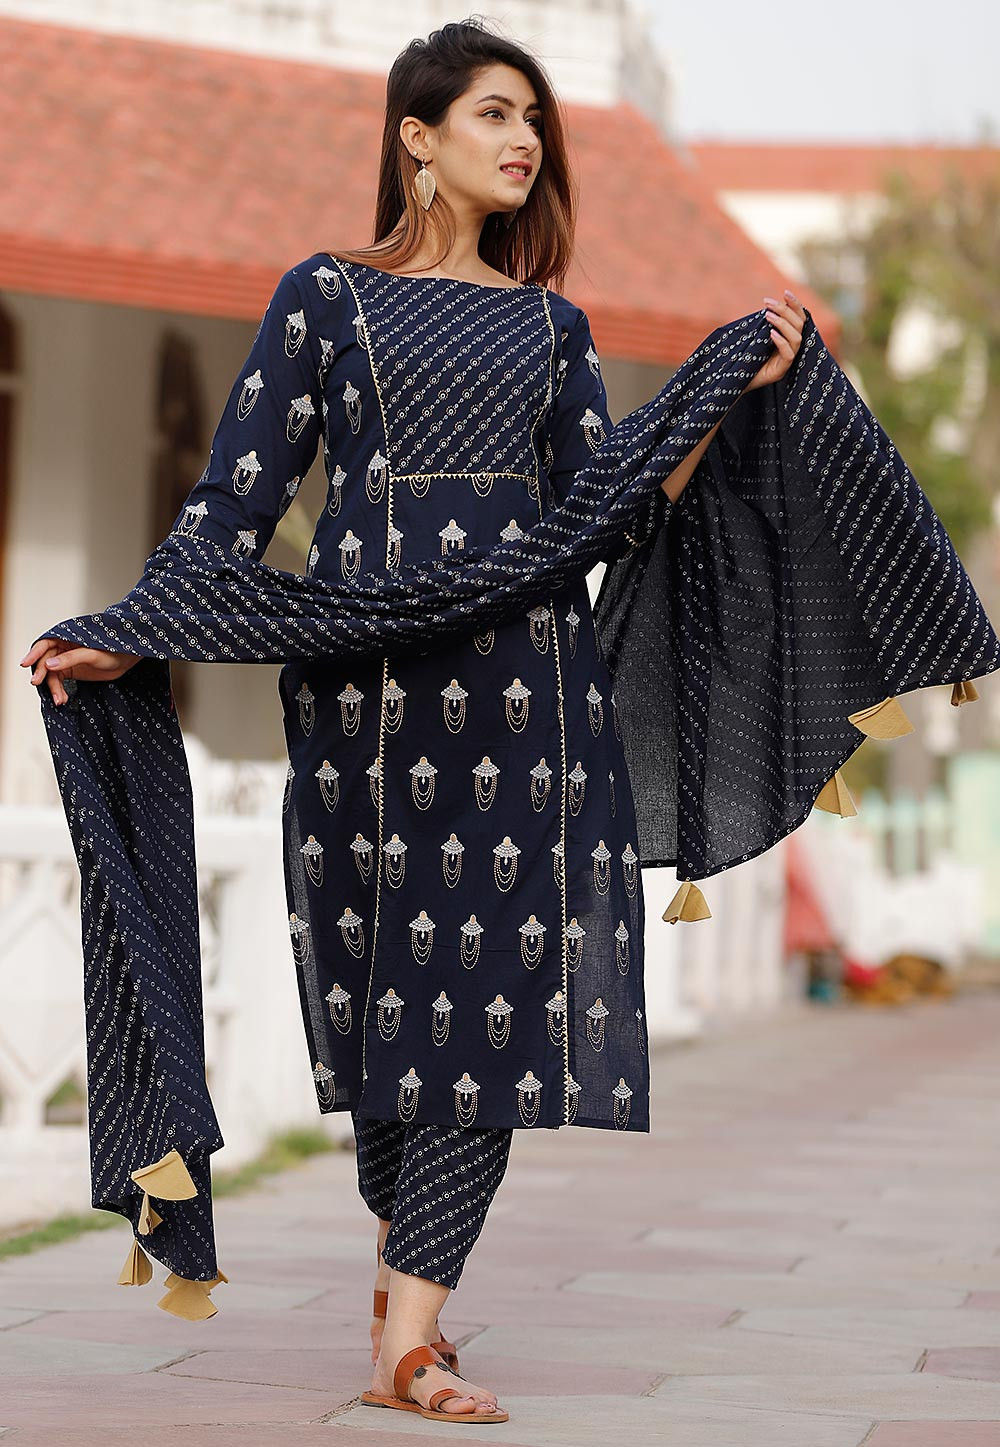 RIWAAYAT TRENDS Unstitched Pakistani Print Embroidered Cotton Salwar Suit  Dress Materials with Dupatta : Amazon.in: Fashion